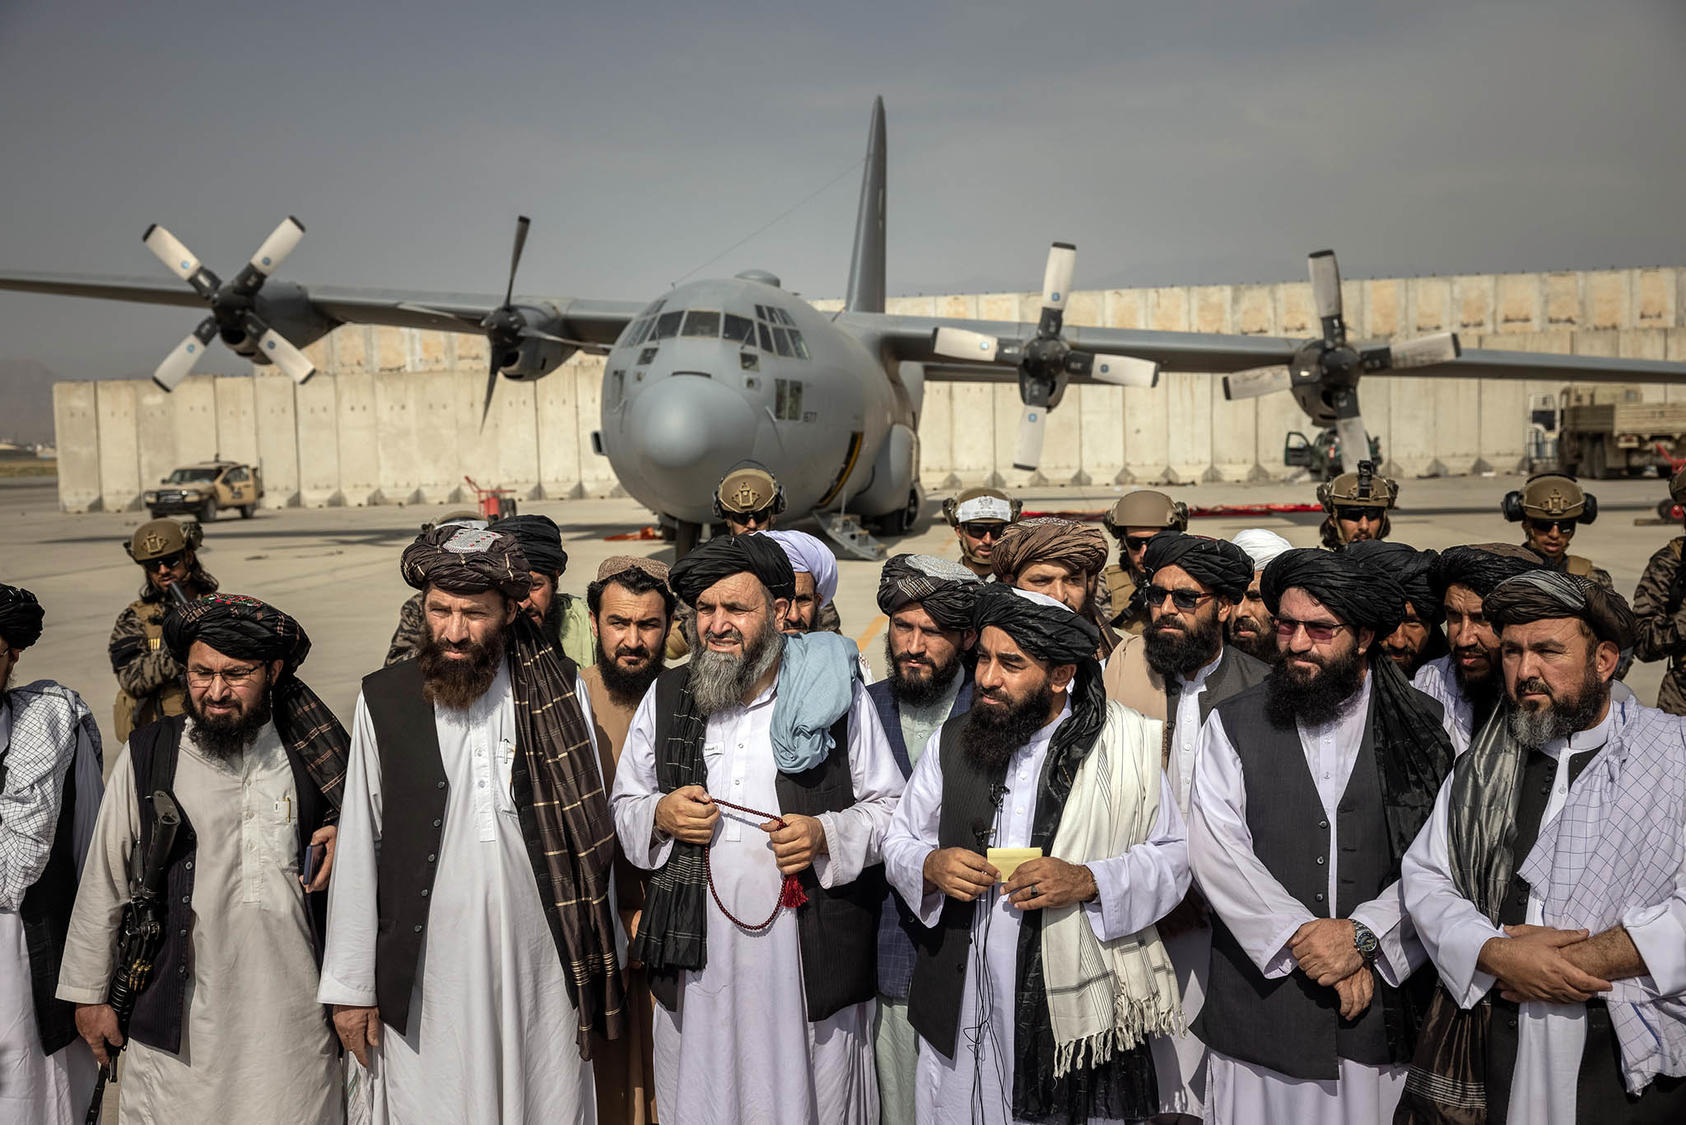 Taliban officials declare victory at the Kabul airport on Aug. 31, 2021. (Jim Huylebroek/The New York Times)